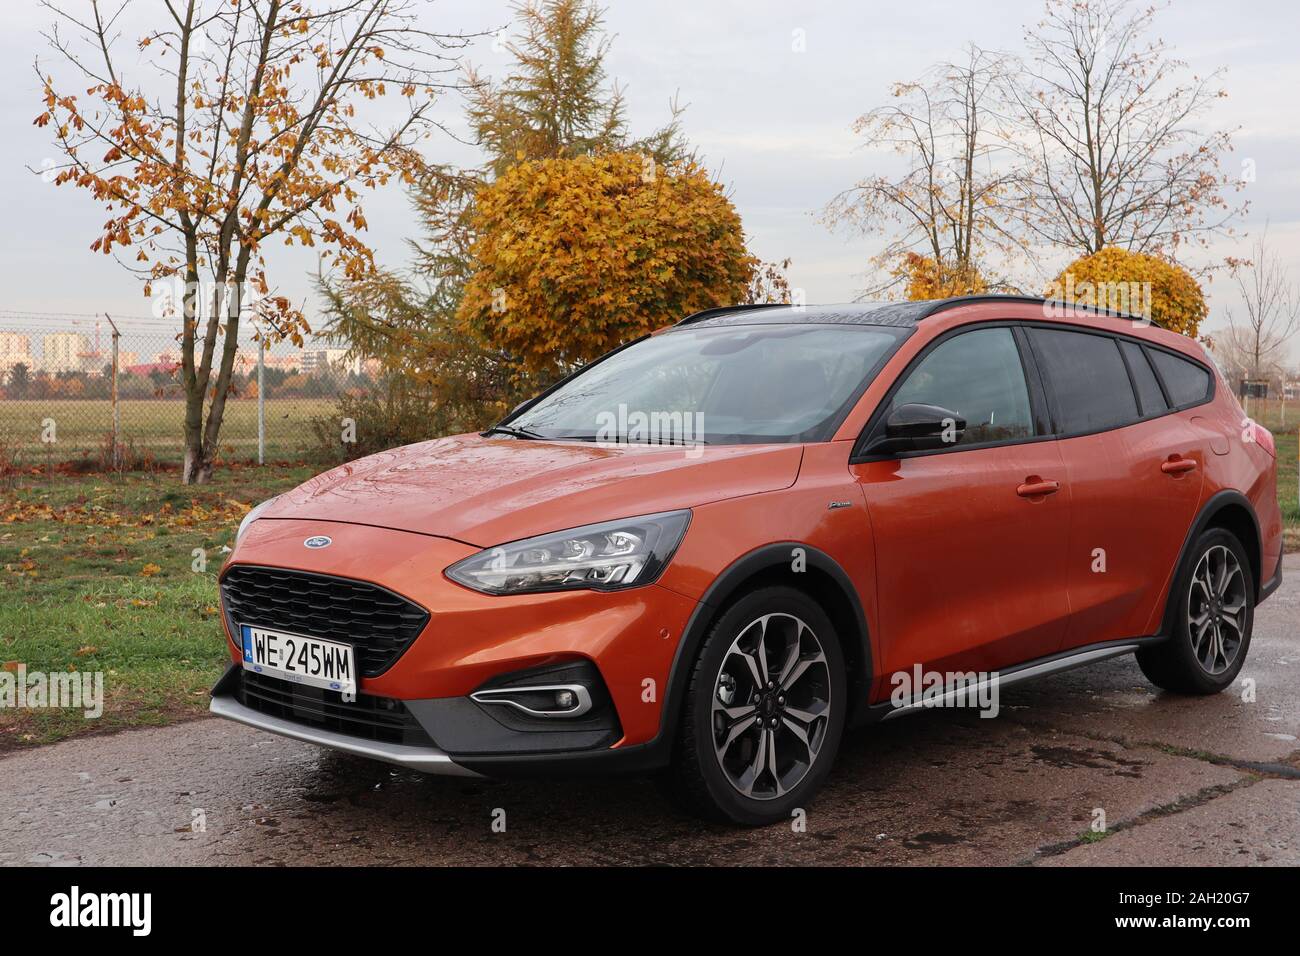 https://c8.alamy.com/comp/2AH20G7/2019-ford-focus-active-15-ecoboost-at-station-wagon-exterior-34-view-2AH20G7.jpg